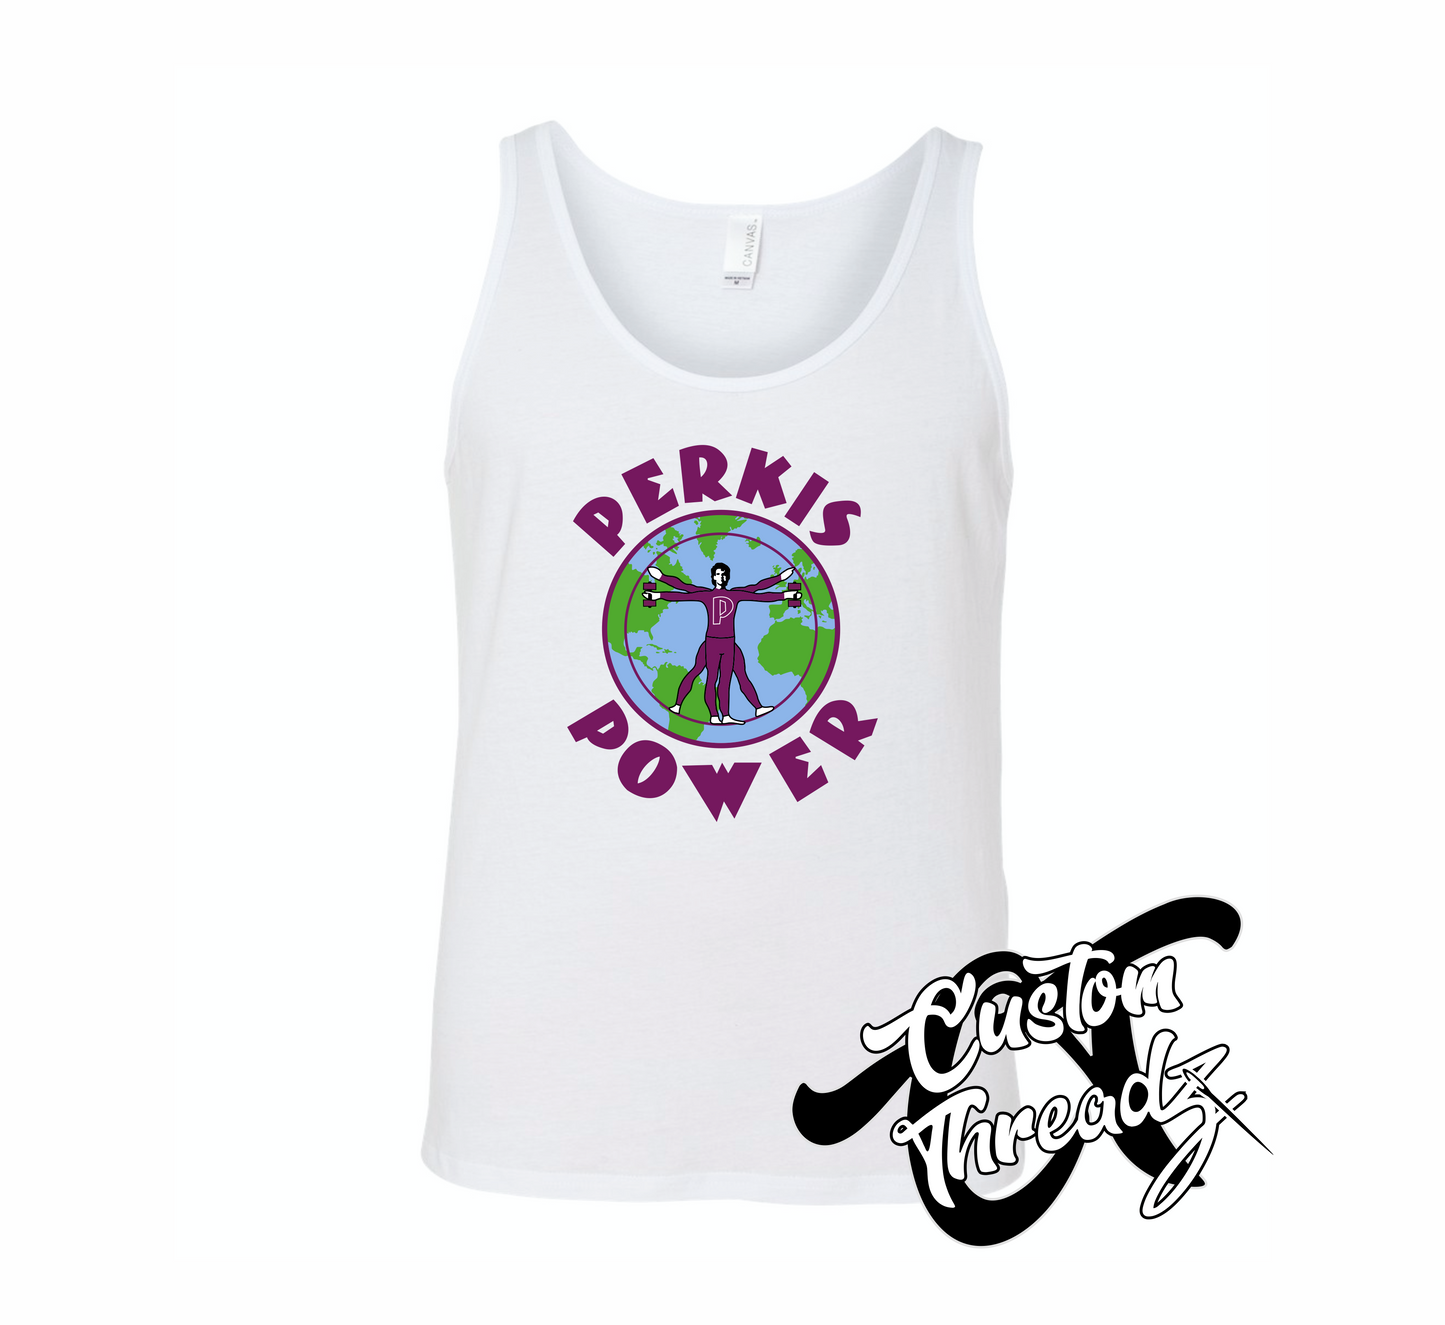 white tank top with perkis power heavyweights DTG printed design